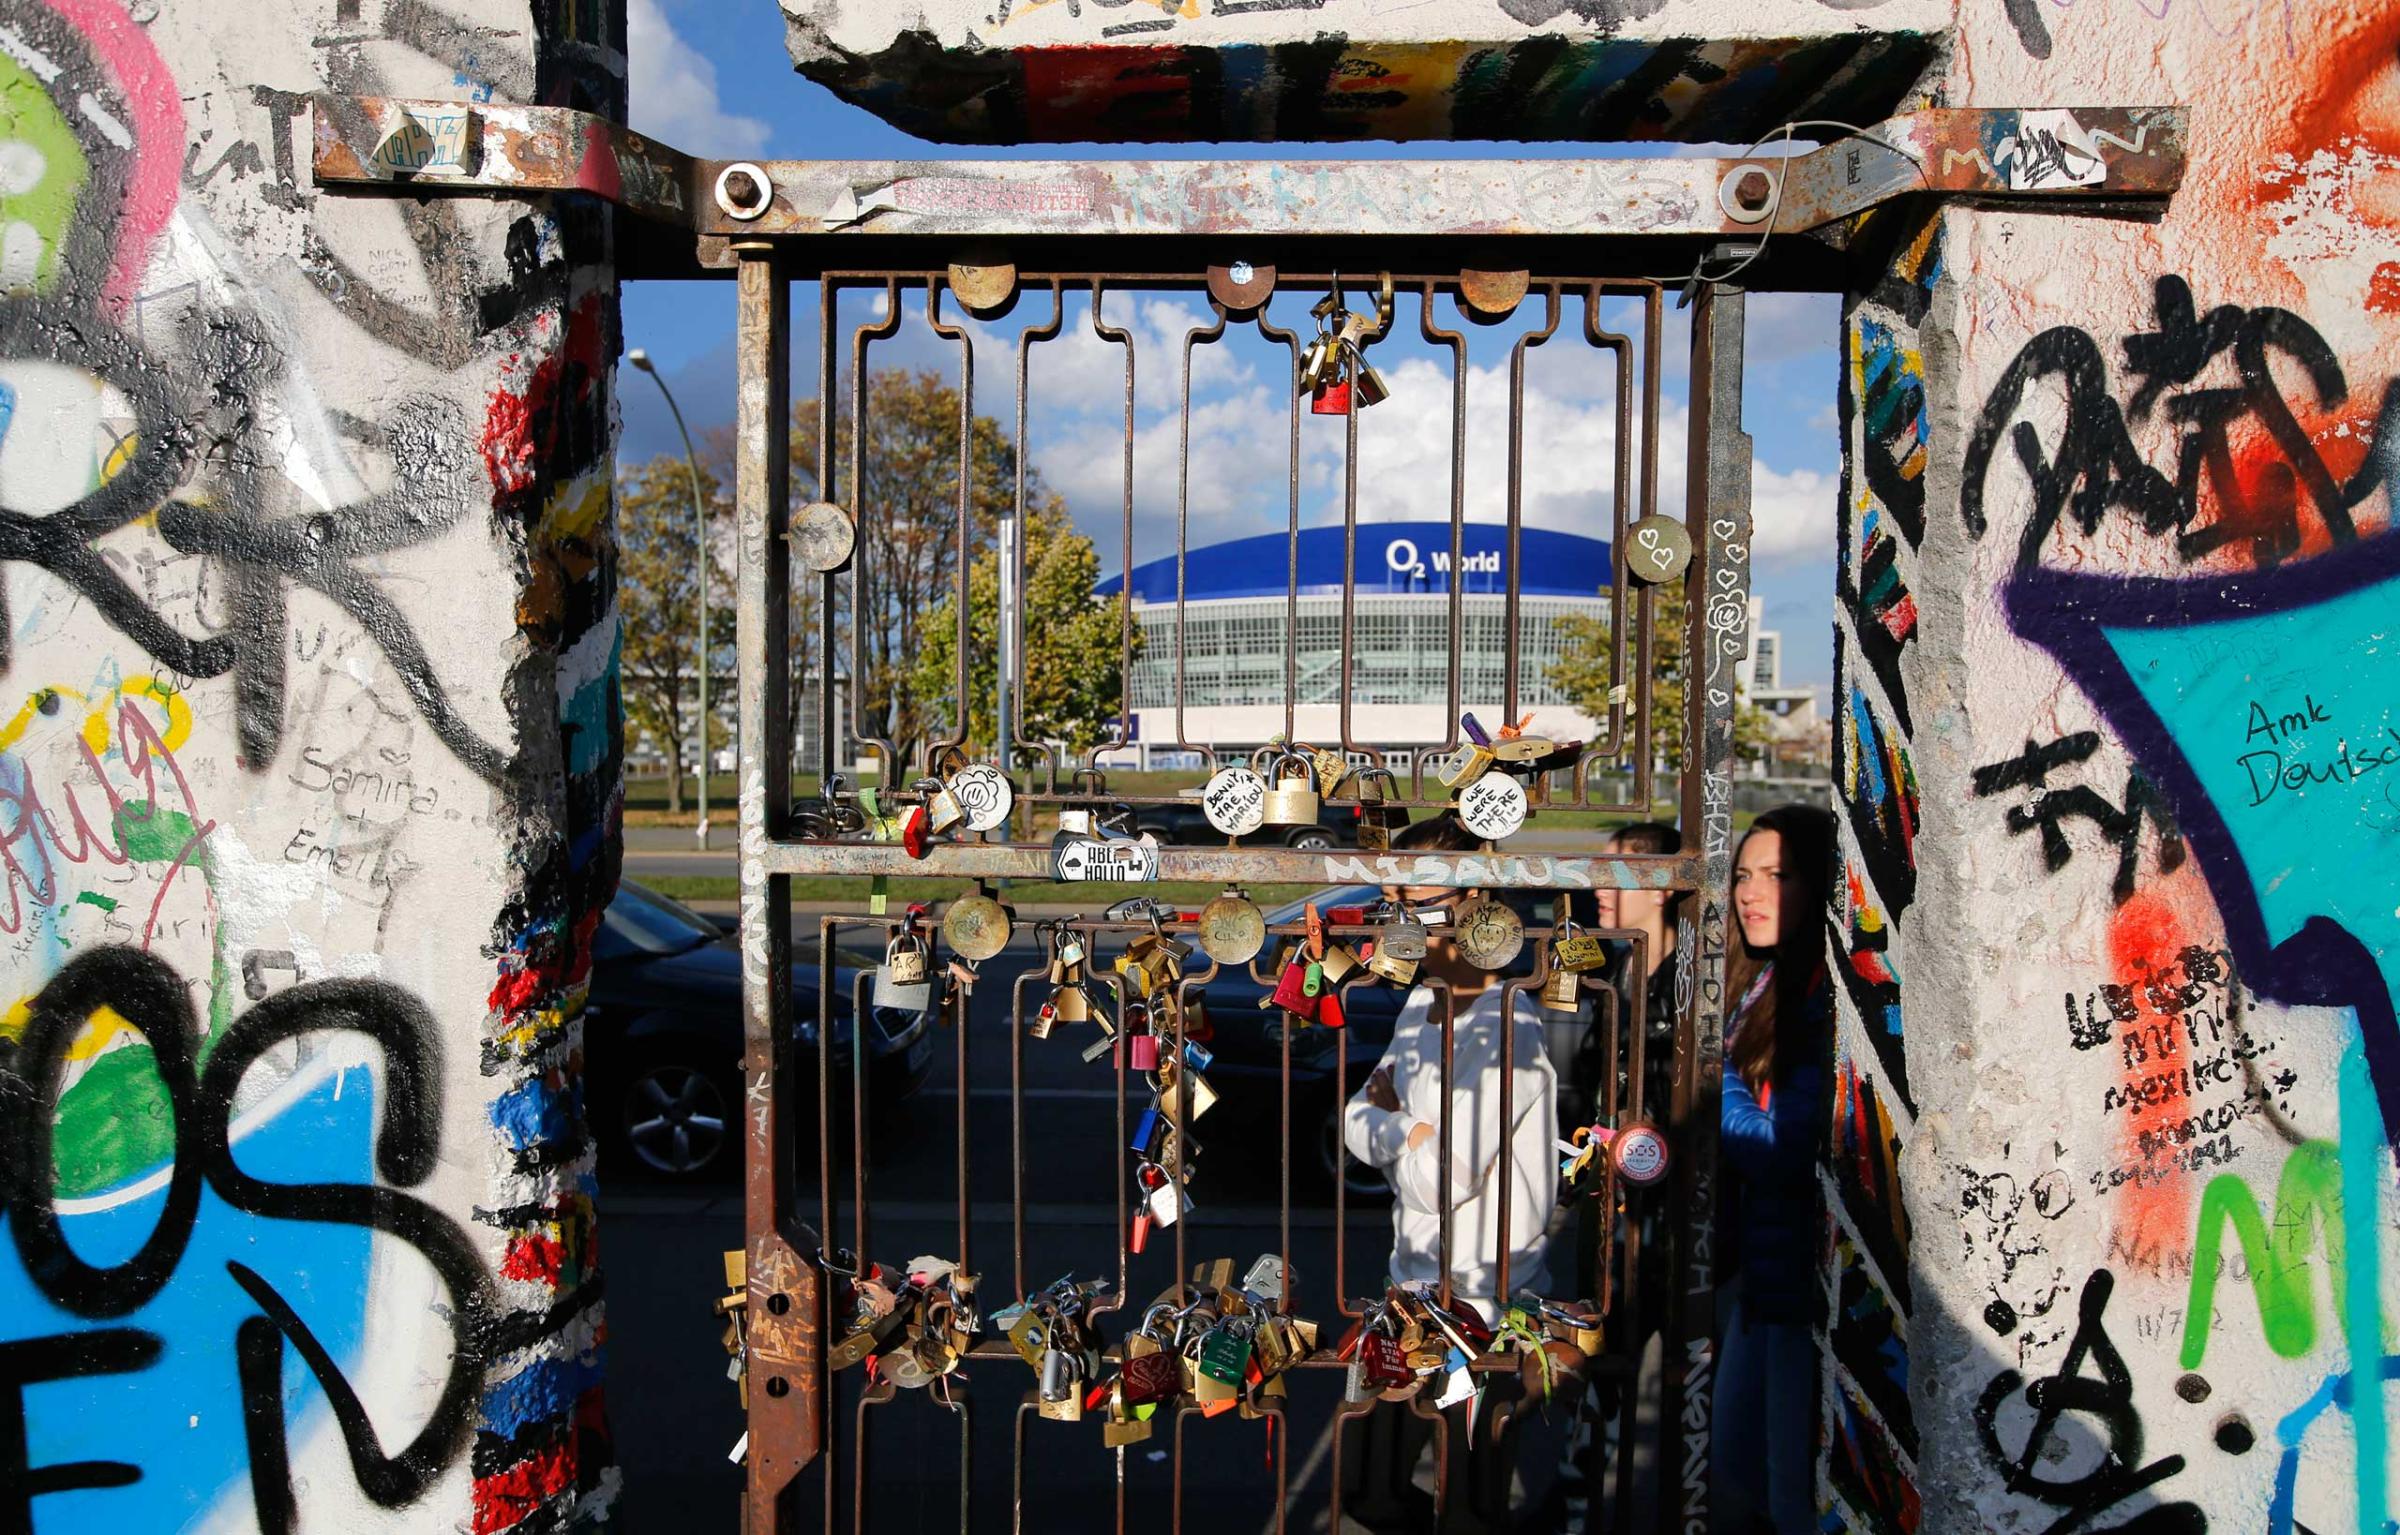 Padlocks symbolising people's romantic relationships are attached at a gate on painted segments of the East Side Gallery in Berlin